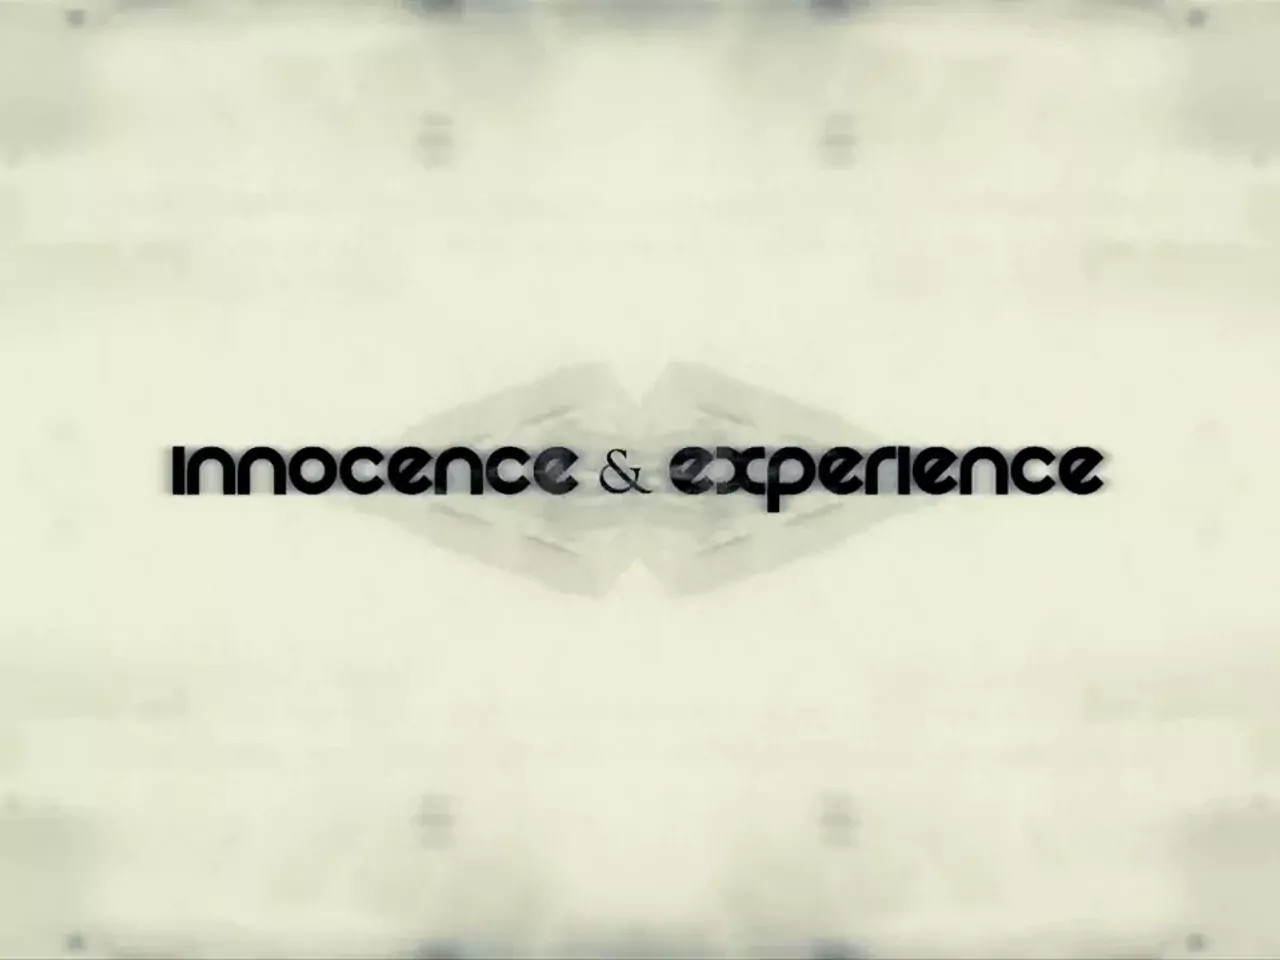 Innocence & Experience (HTL Vol 13) by Hold Tight London video cover